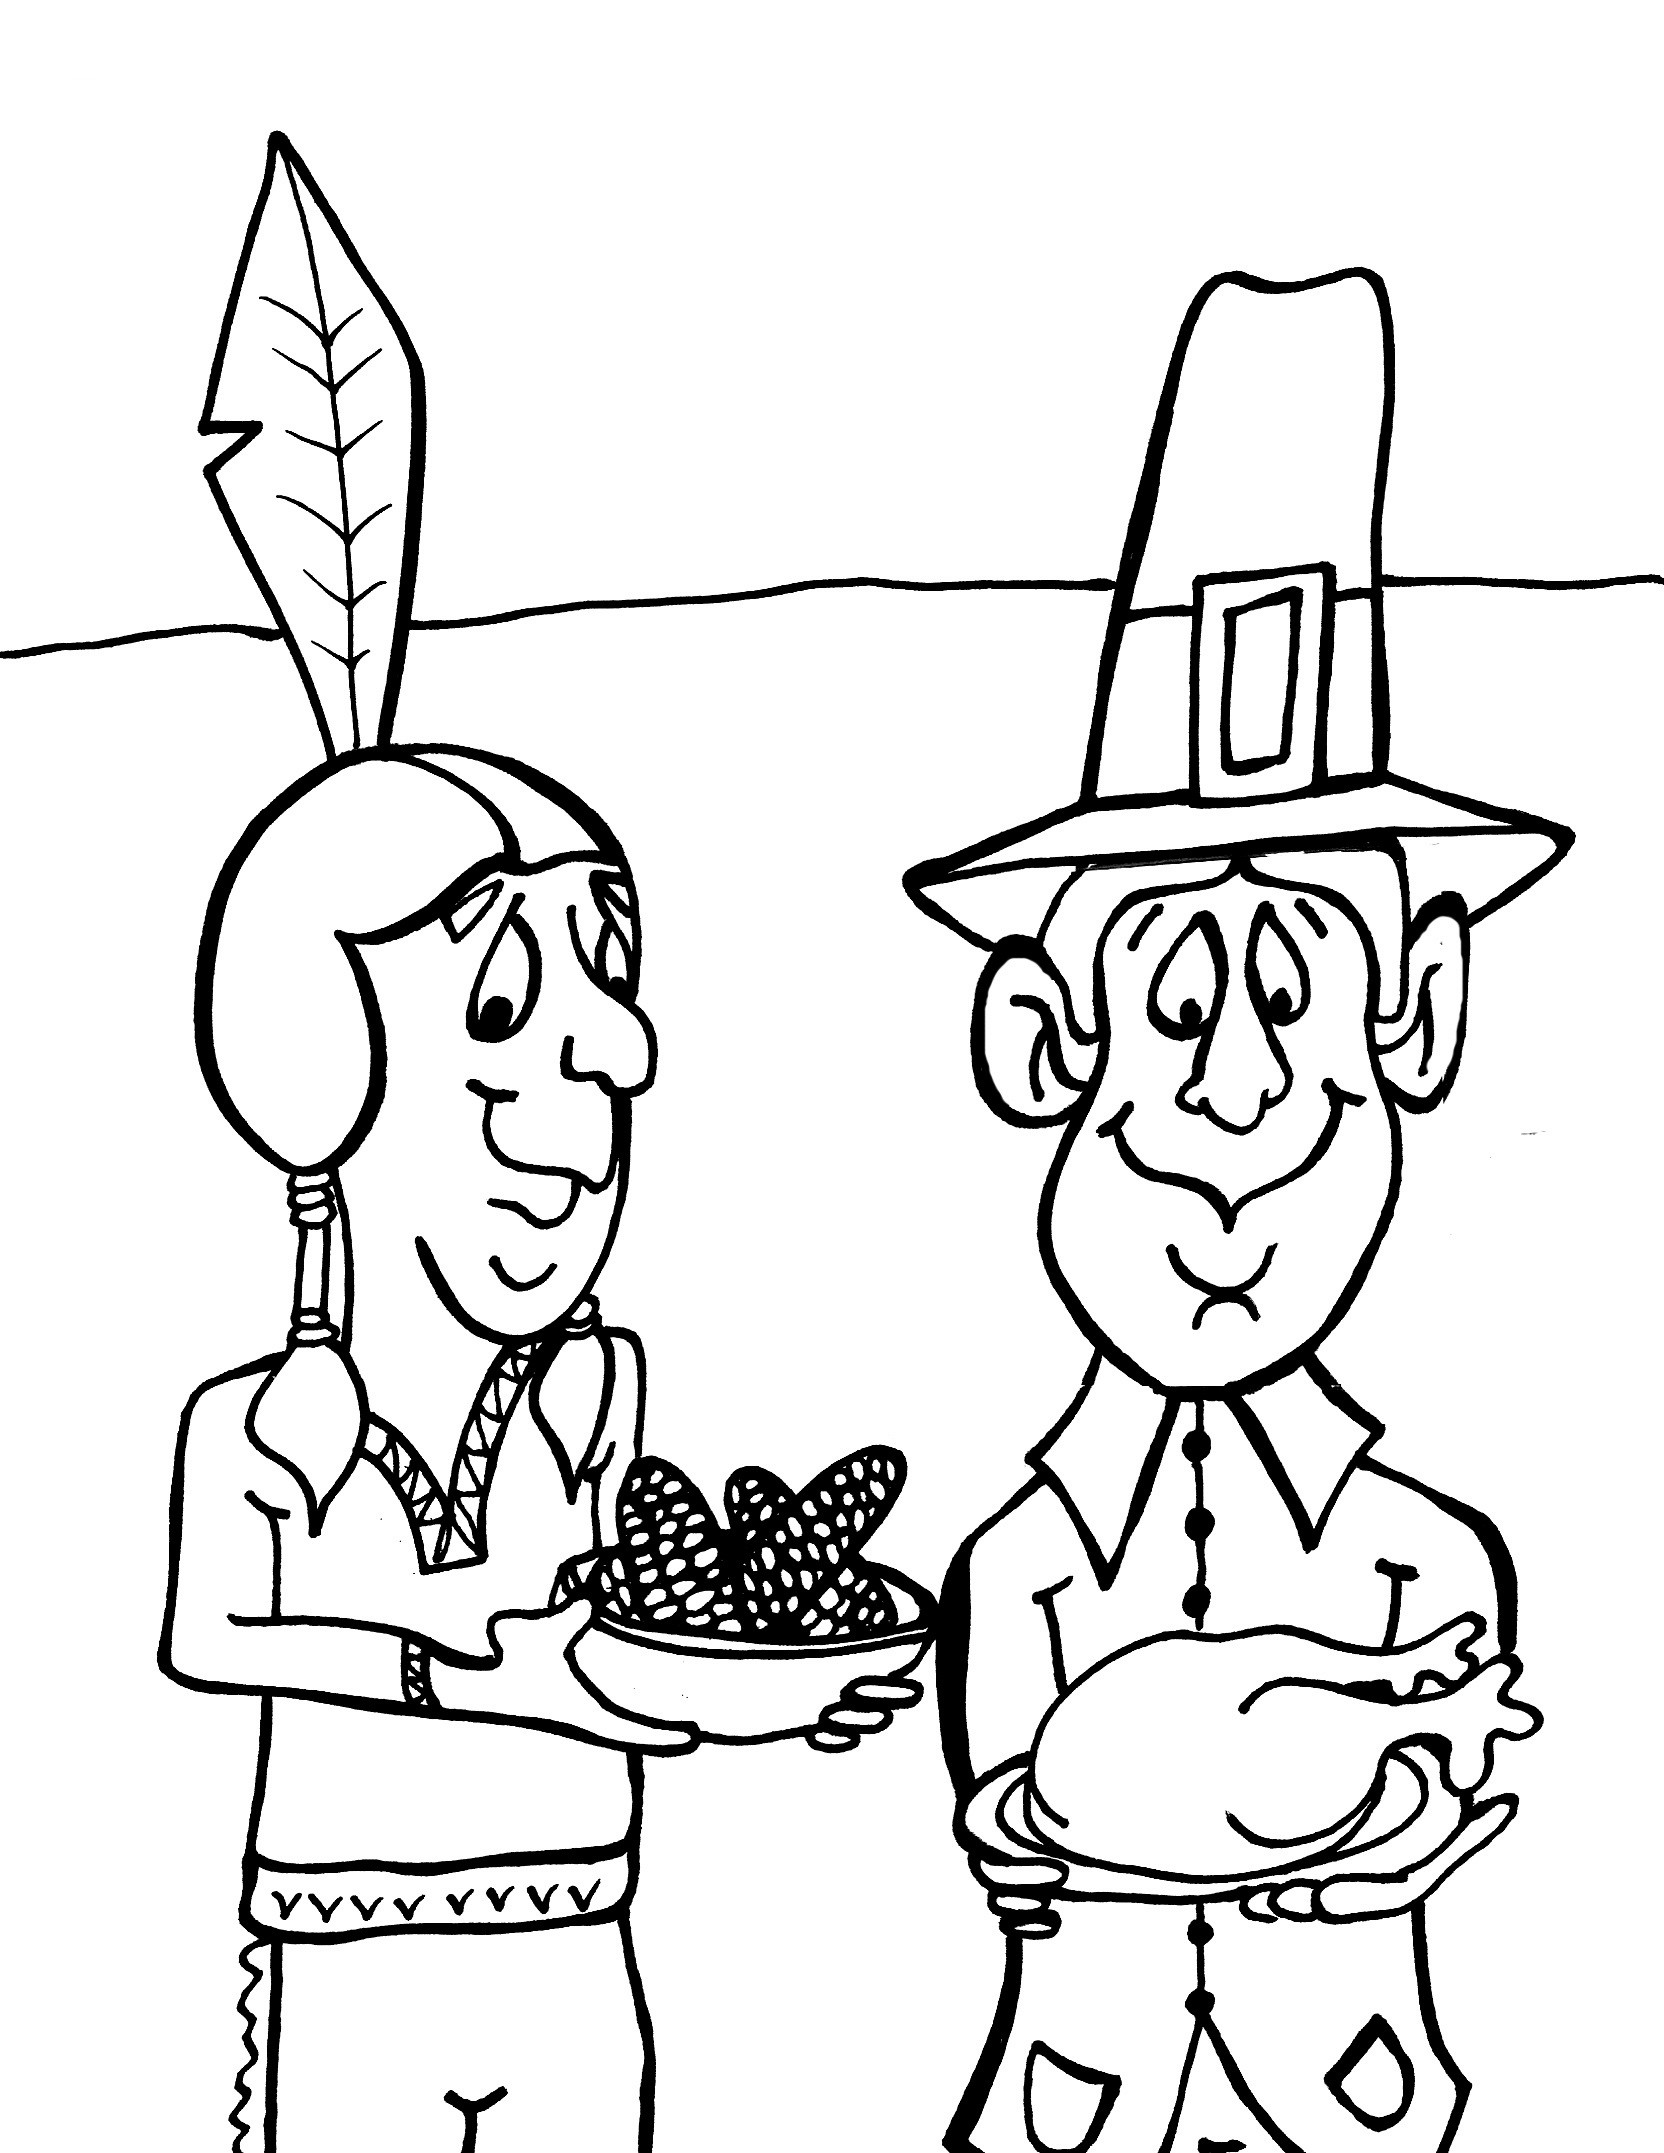 Coloring Pages For Kids Thanksgiving
 Free Printable Thanksgiving Coloring Pages For Kids